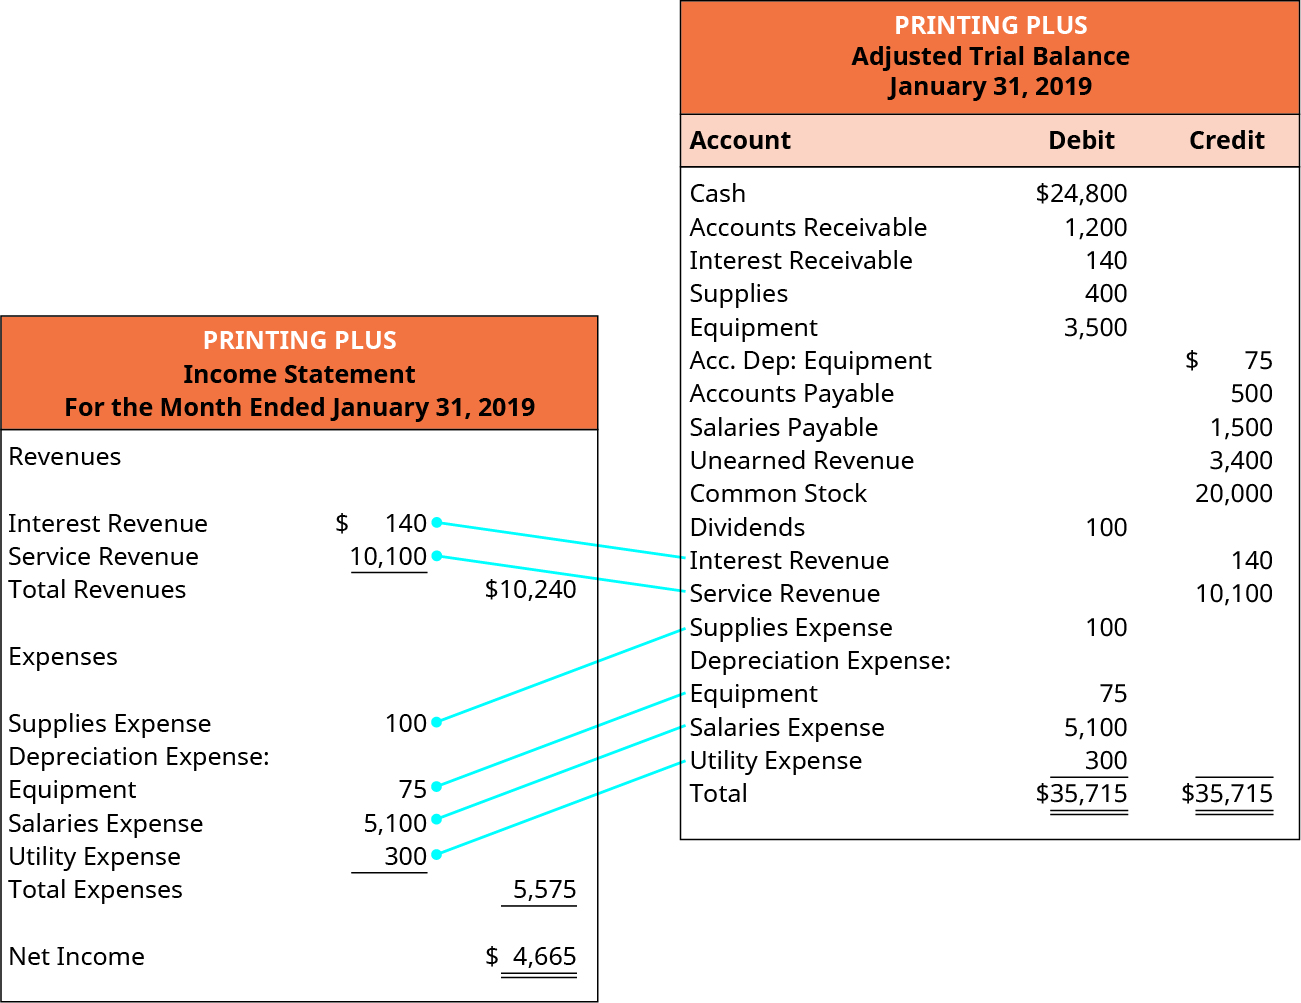 Printing Plus, Income Statement, For the Month Ended January 31, 2019. Revenues: Interest Revenue $140; Service Revenue 10,100; Total Revenues $10,240. Expenses: Supplies Expense 100; Depreciation Expense: Equipment 75; Salaries Expense 5,100; Utility Expense 300; Total Expenses 5,575. Net Income $4,665. The Printing Plus Adjusted Trial Balance at January 31, 2019 is to the right of the Income Statement with lines connecting the Income Statement accounts from the Adjusted Trial Balance to the same accounts on the Income Statement. Printing Plus, Adjusted Trial Balance, January 31, 2019. Debit accounts: Cash $24,800; Accounts Receivable 1,200; Interest Receivable 140; Supplies 400; Equipment; 3,500; Dividends 100; Supplies Expense 100; Equipment 75; Salaries Expense 5,100; Utility Expense 300; Total Debit $35,715. Credit accounts; Equipment $75; Accounts Payable 500; Salaries Payable 1,500; Unearned Revenue 3,400; Common Stock 20,000; Interest Revenue 140; Service Revenue 10,100; Total Credit $35,715.